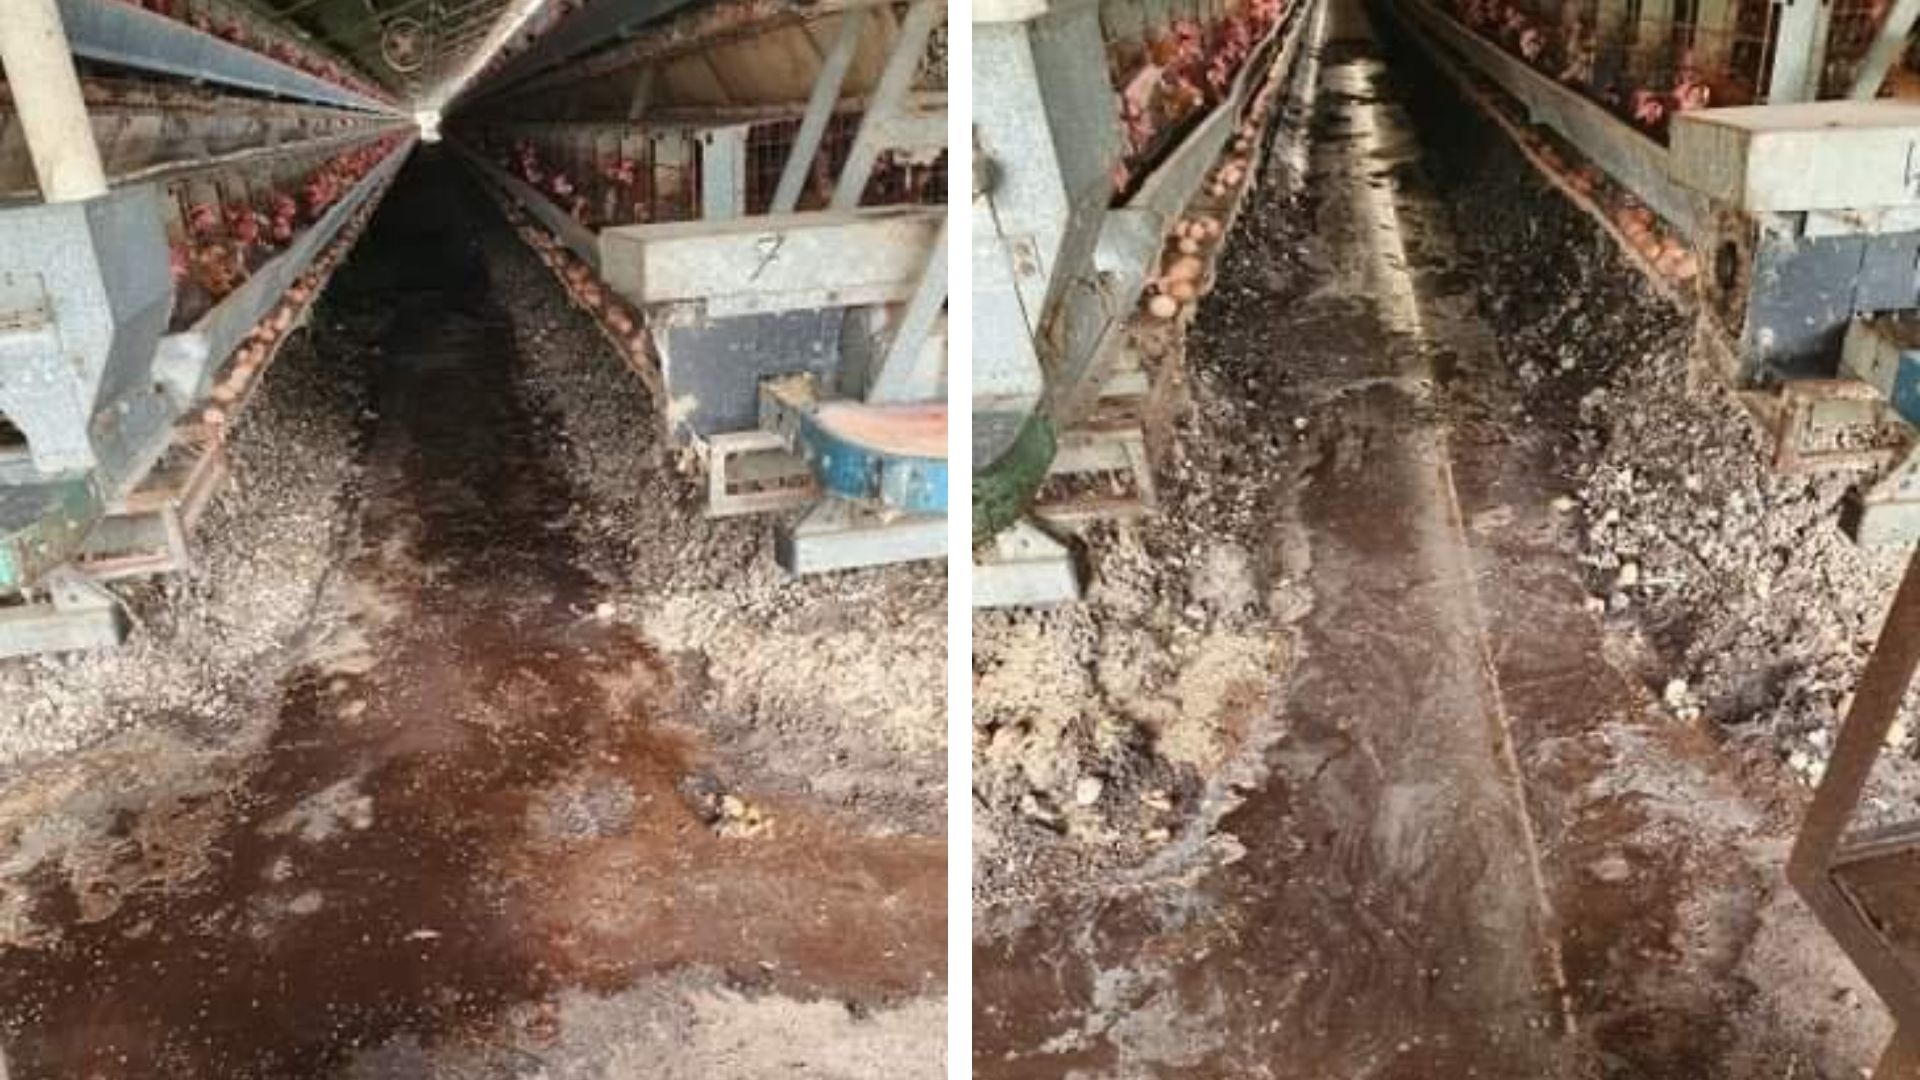 Filthy conditions at Williams Eggs.